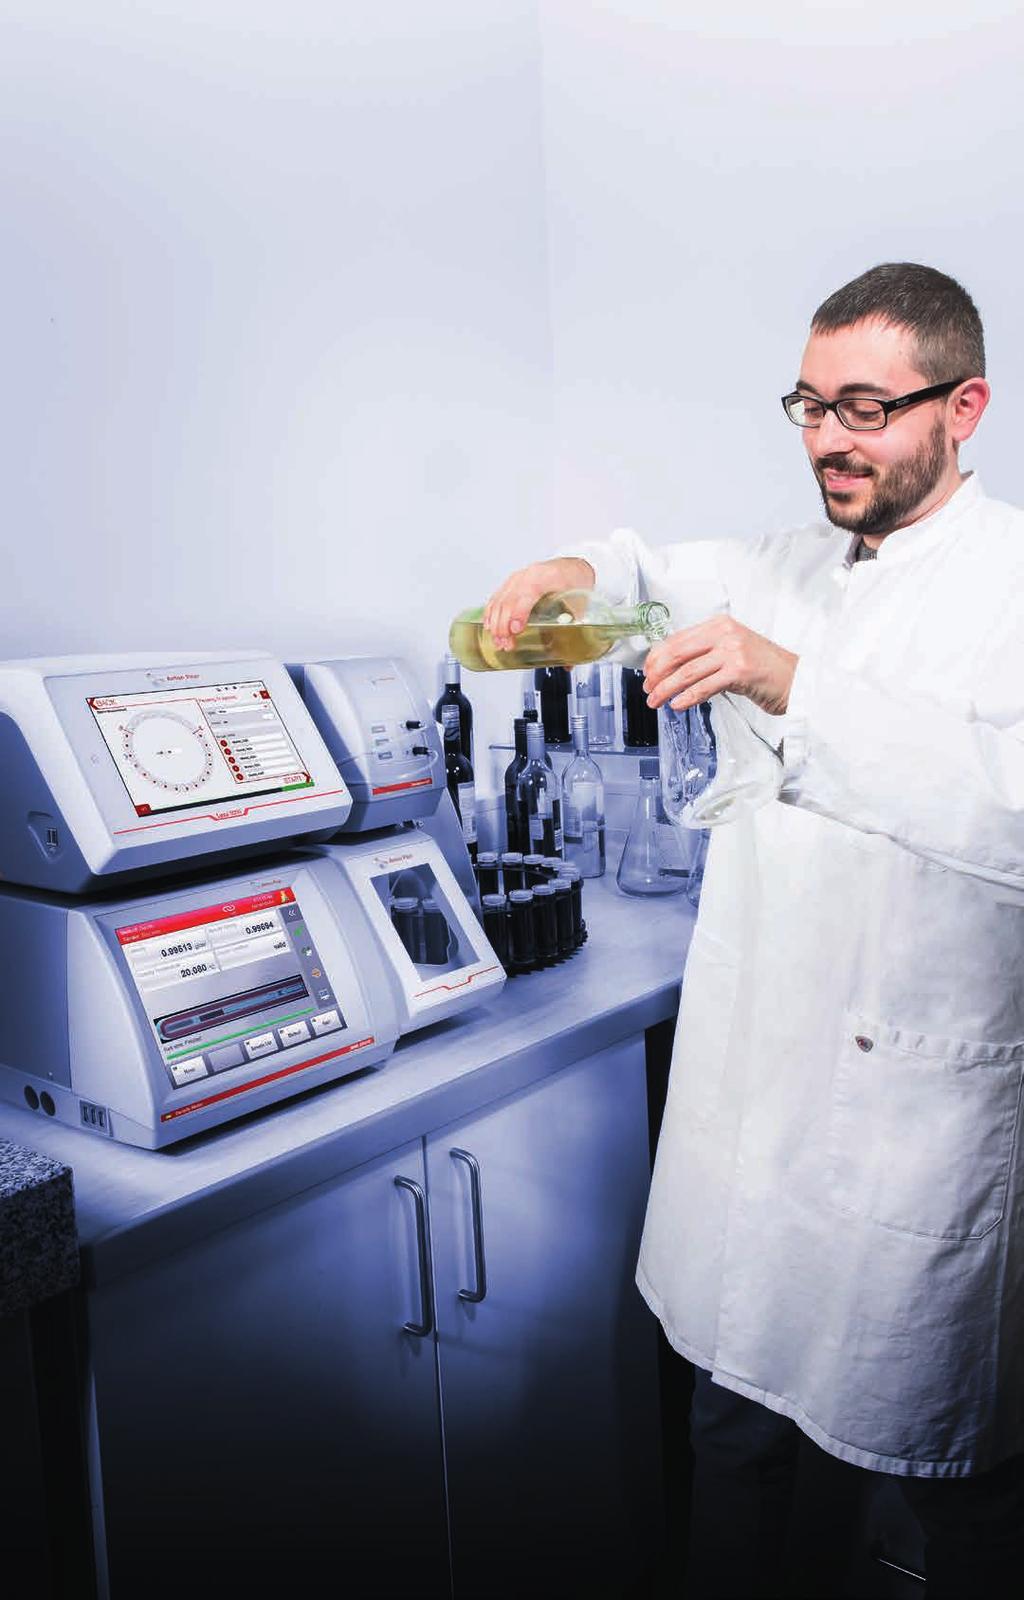 LYZA 5000 WINE The evolution of wine analysis The novel multiparameter FTIR analyzer Lyza 5000 Wine is your solution for the analysis of must, must in fermentation, and wine.